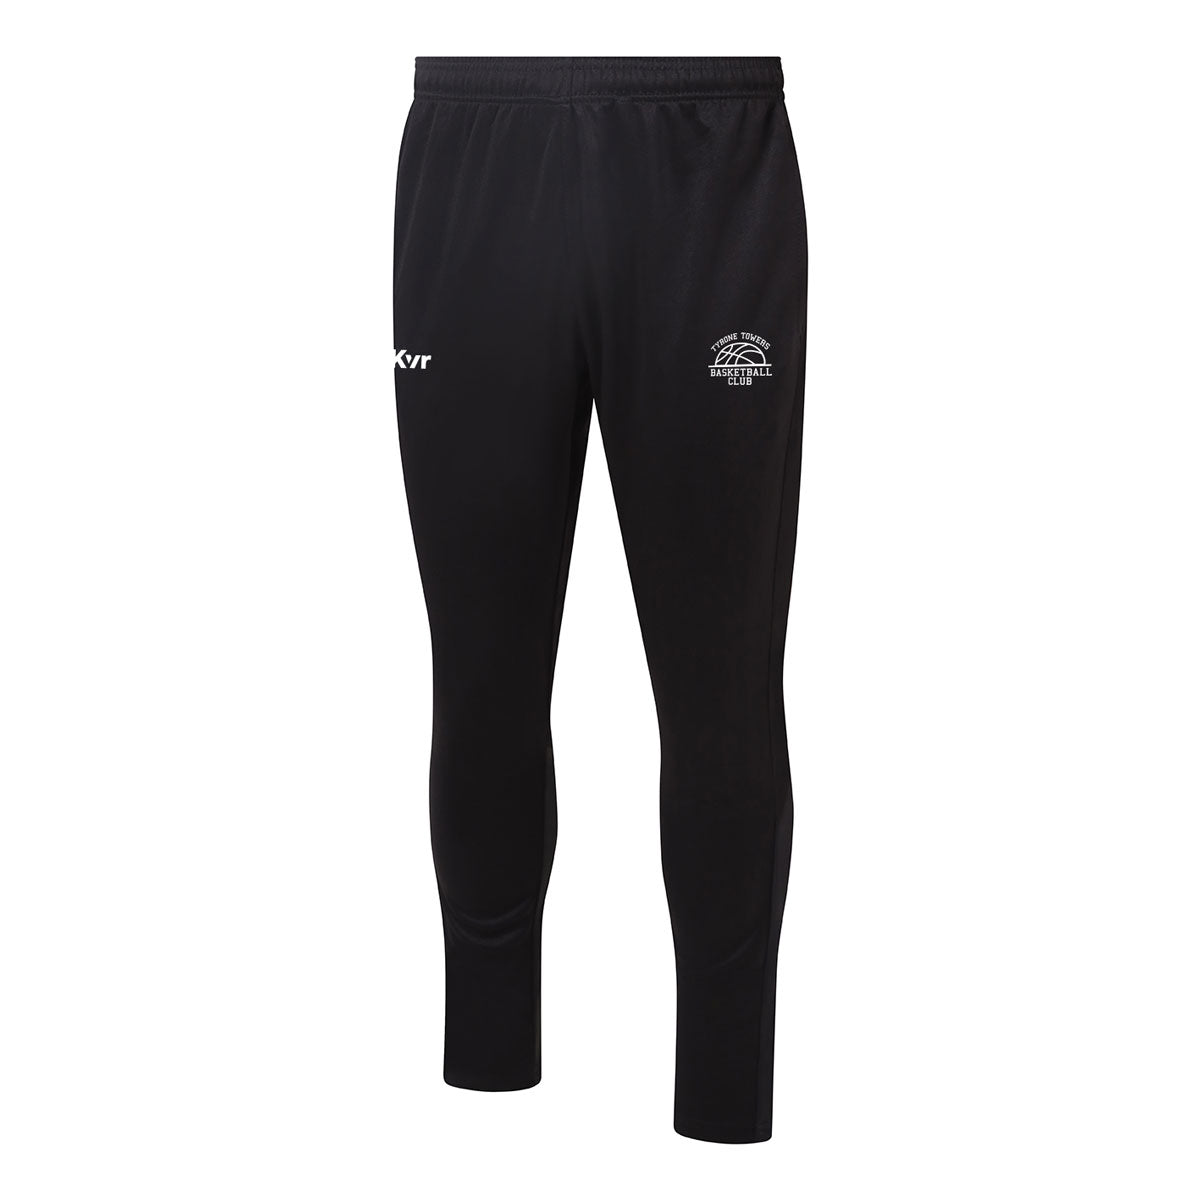 Mc Keever Tyrone Towers Basketball Core 22 Skinny Pants - Youth - Black